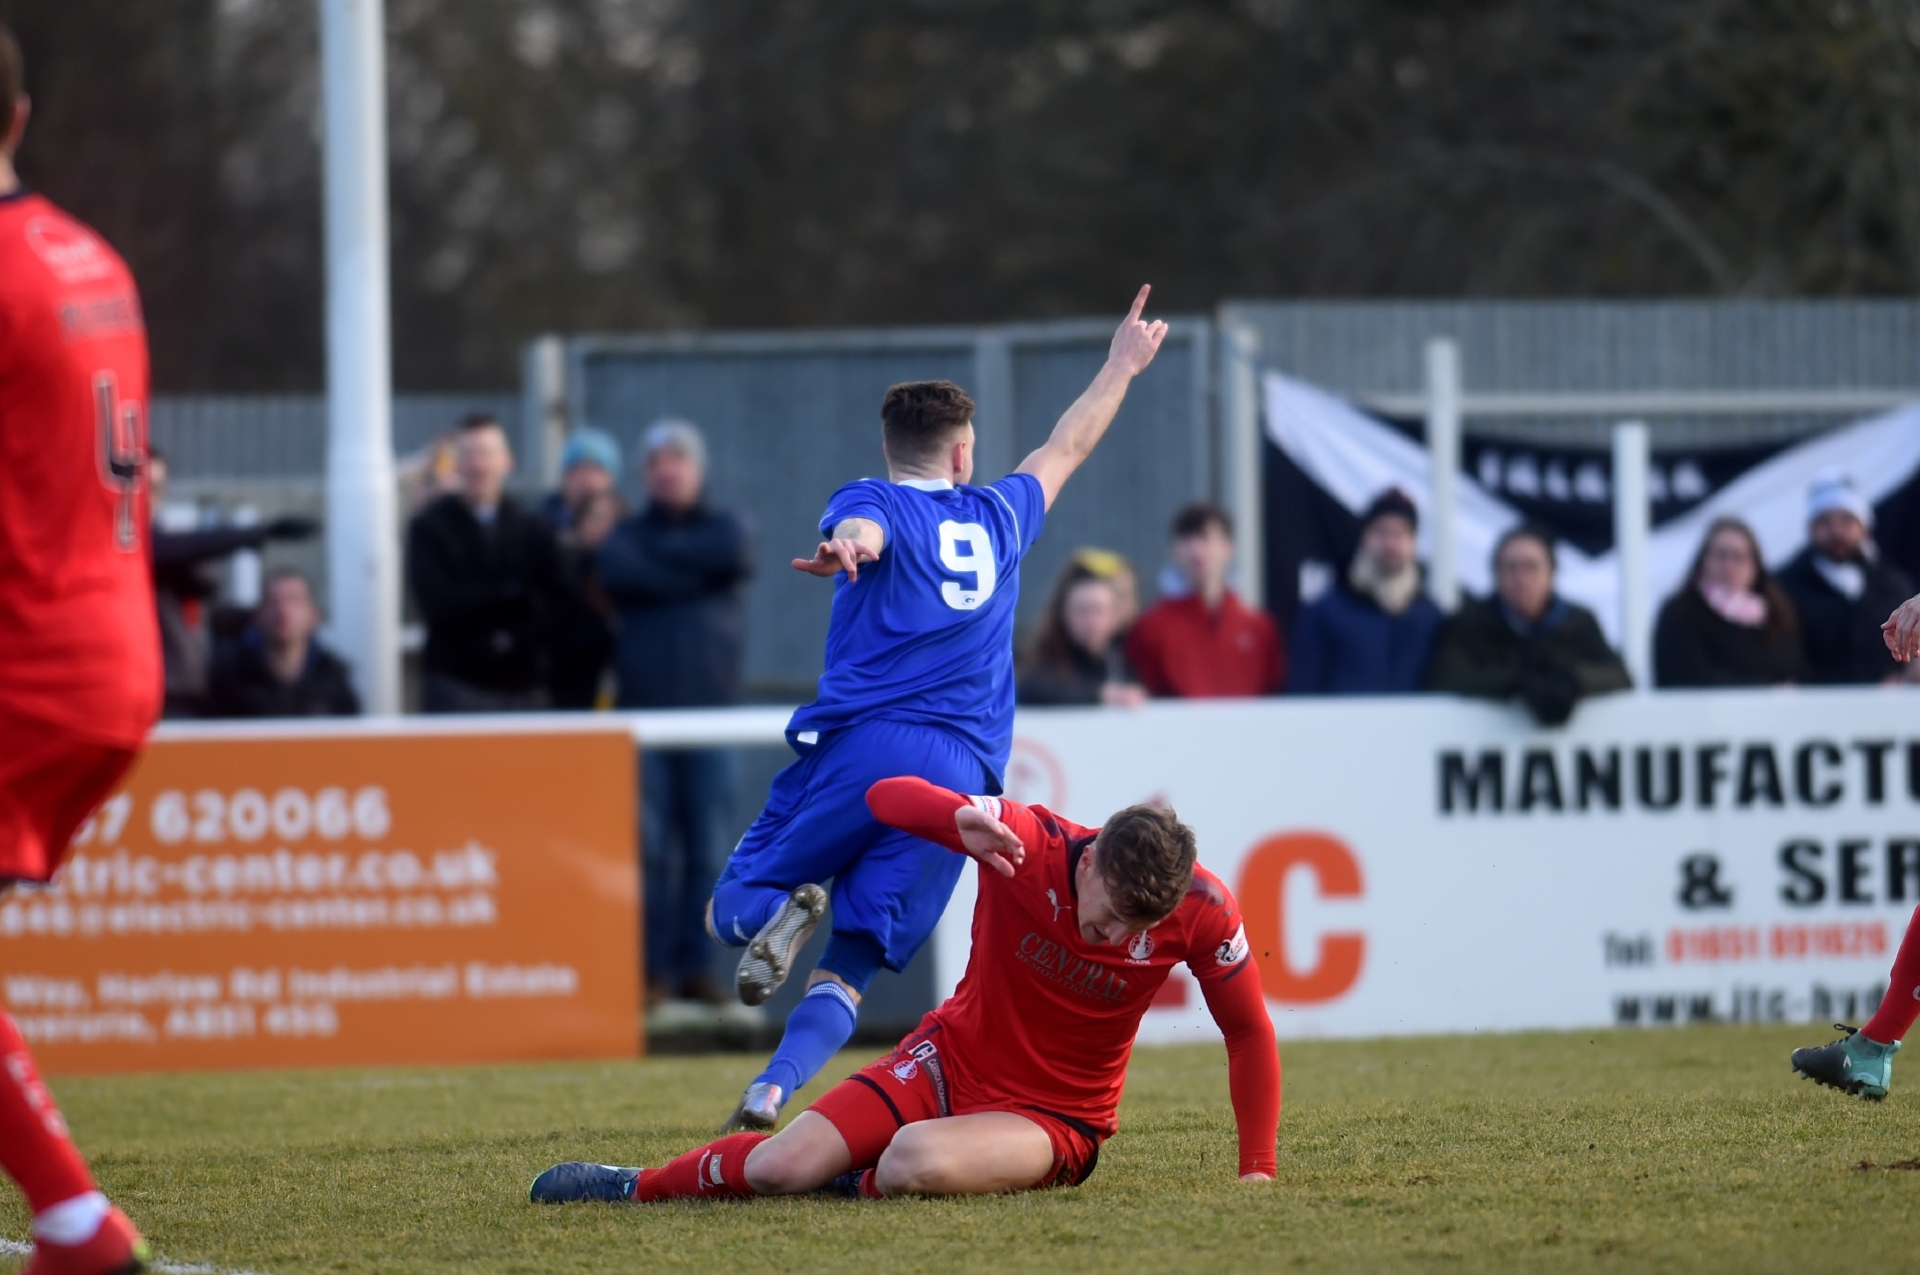 Cove's Mitch Megginson celebrating after scoring an equaliser for his side to make it 1-1
Pictures by Darrell Benns